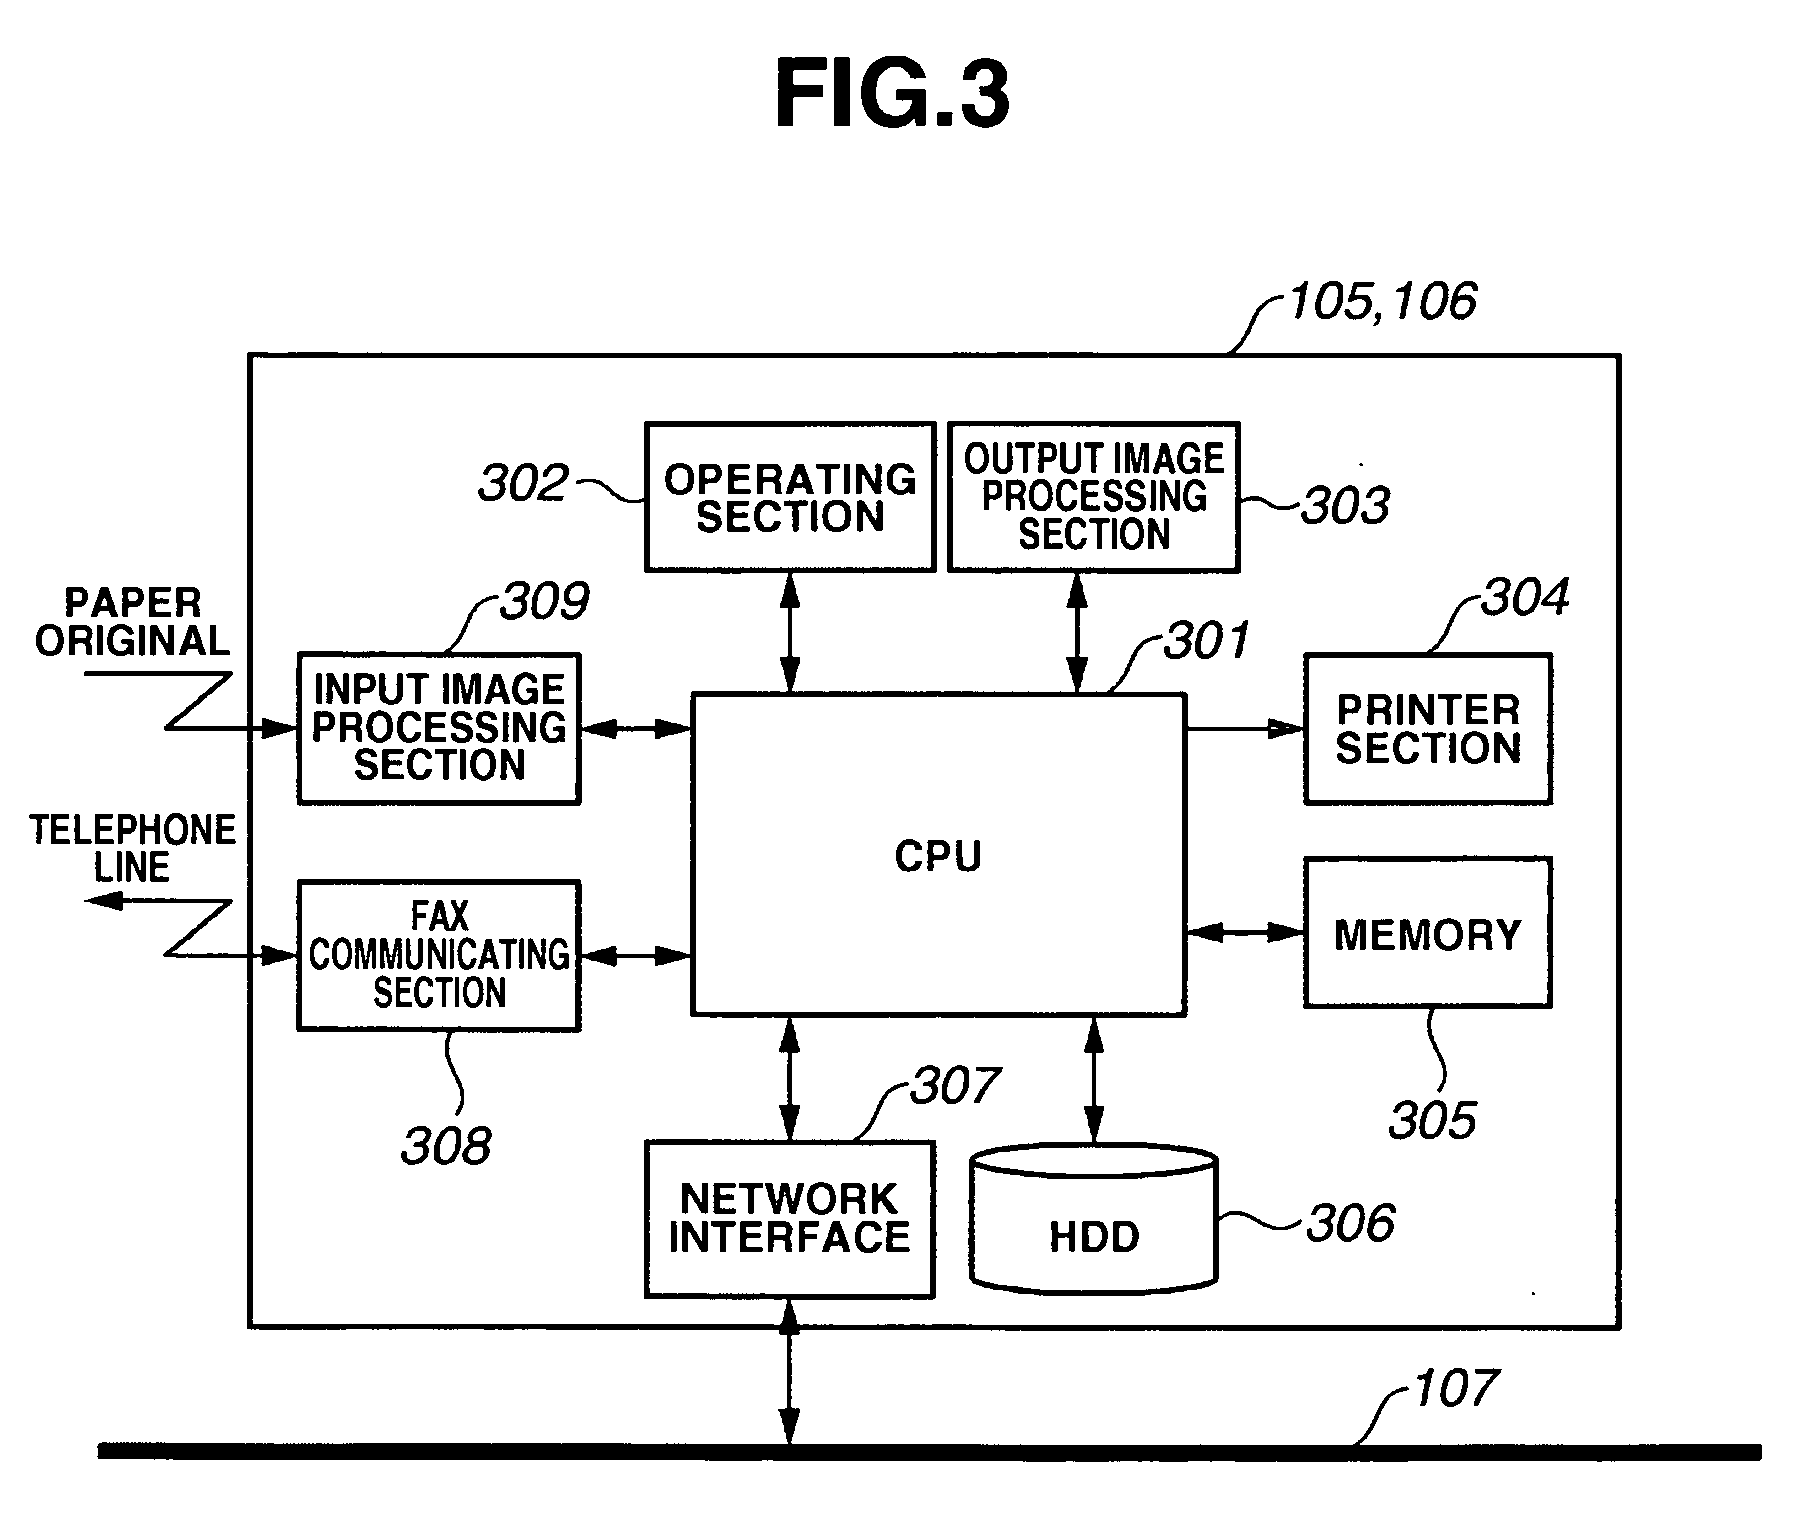 Image processing apparatus and method for transmitting encrypted data